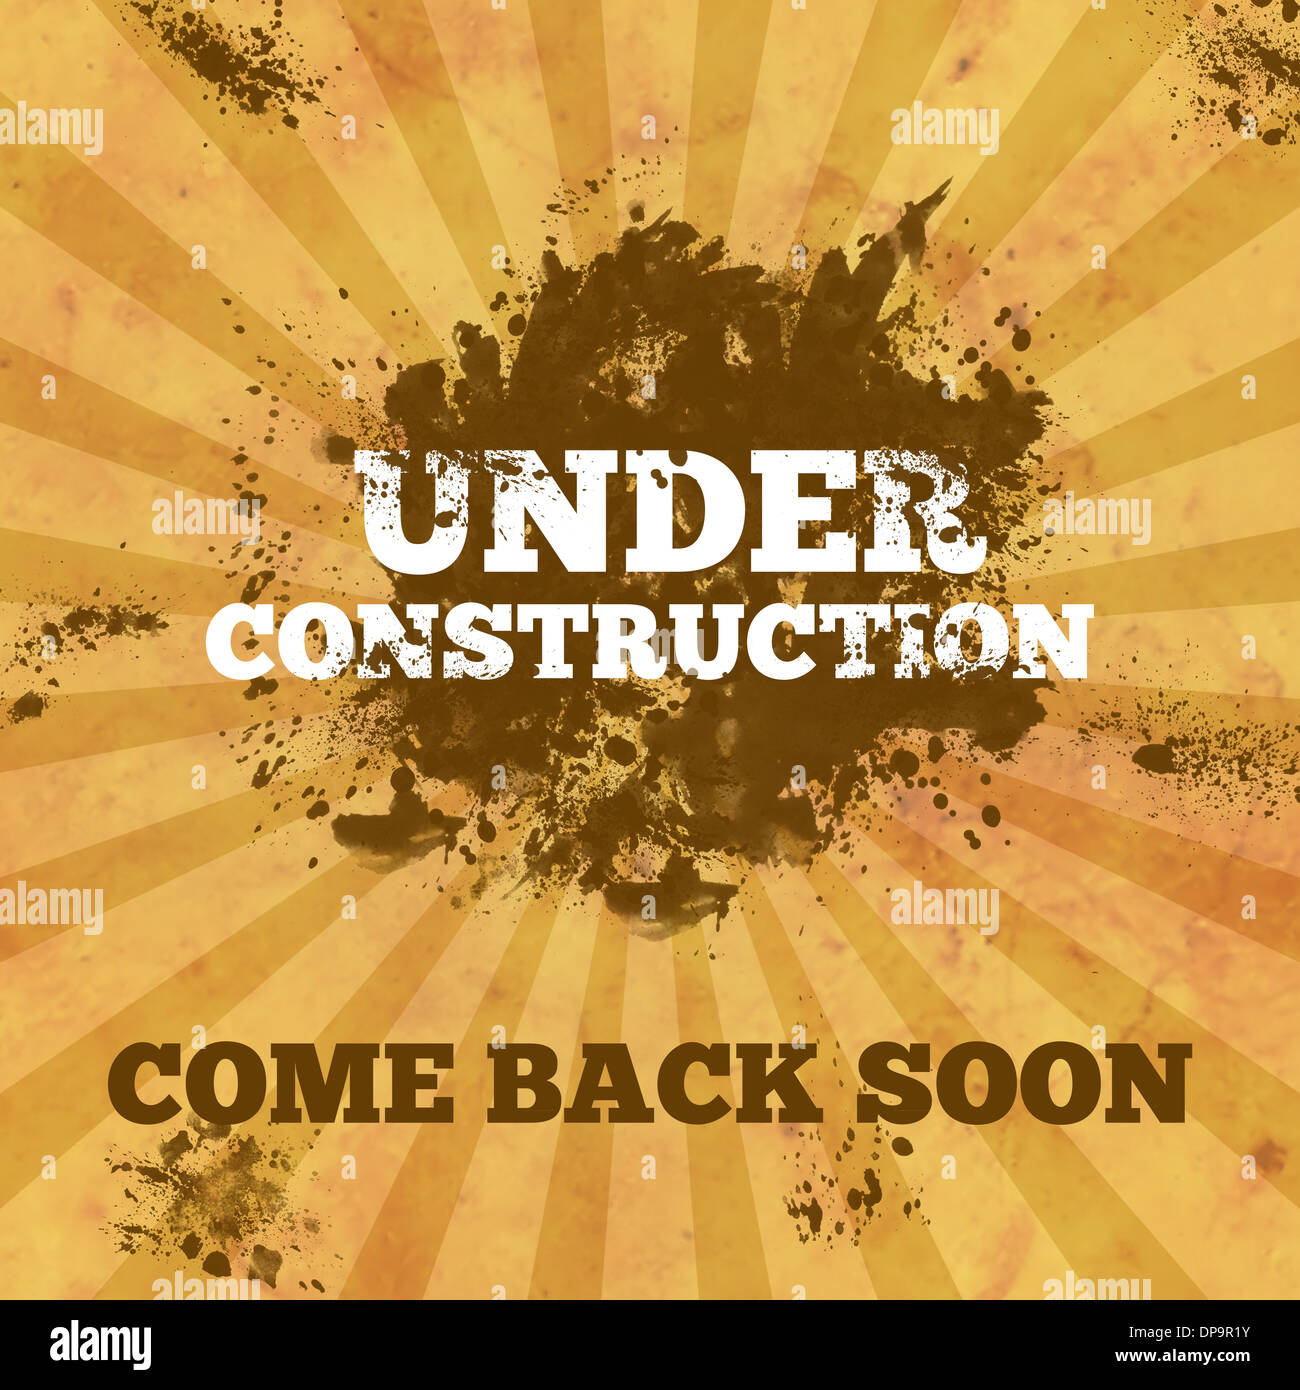 Under Construction - Brown Grunge and Blot Stock Photo